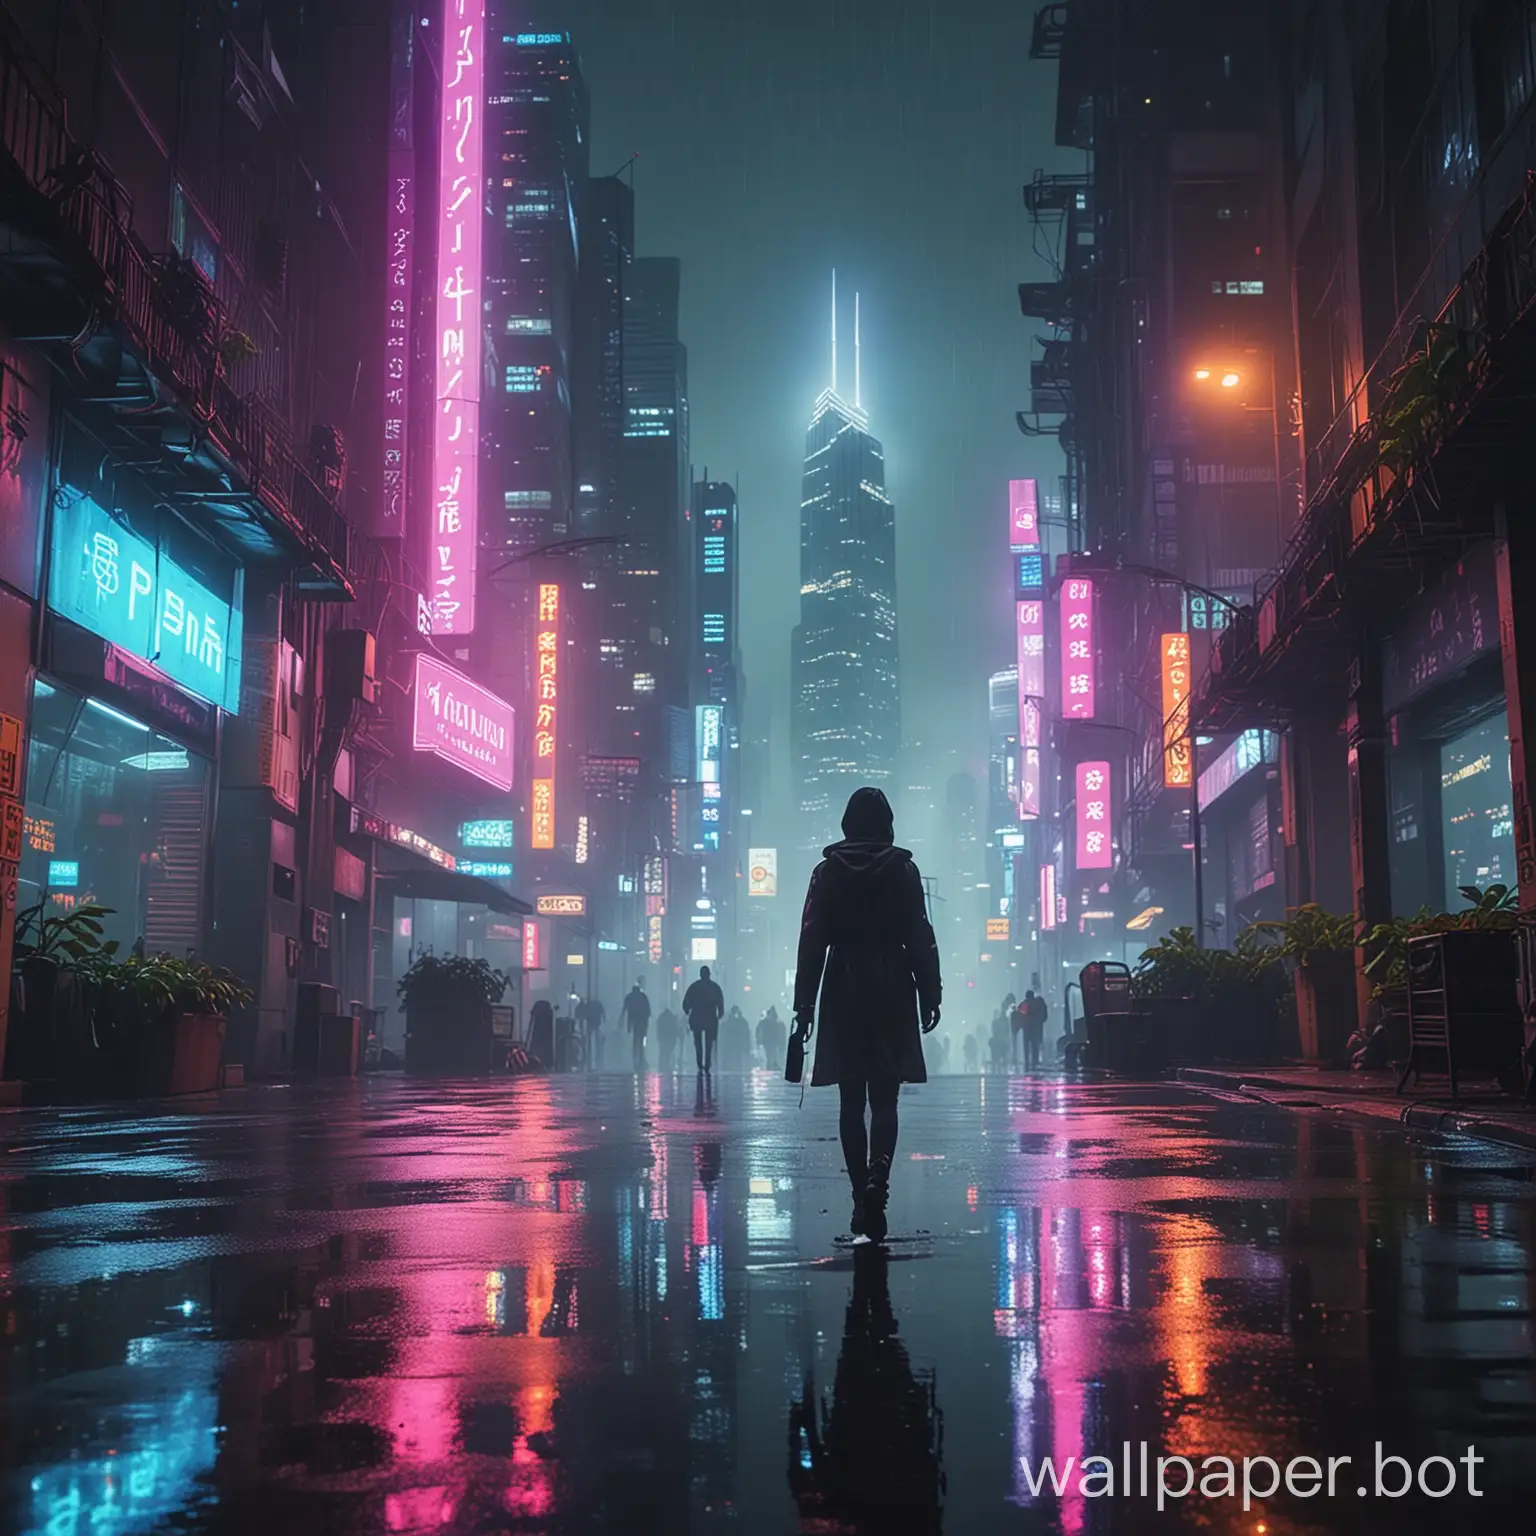 In a bustling city of the future, towering skyscrapers are illuminated by neon lights, casting reflections on the rain-soaked streets below. Amidst the urban jungle, a lone figure walks, their silhouette blurred by the mist, hinting at a mysterious journey ahead